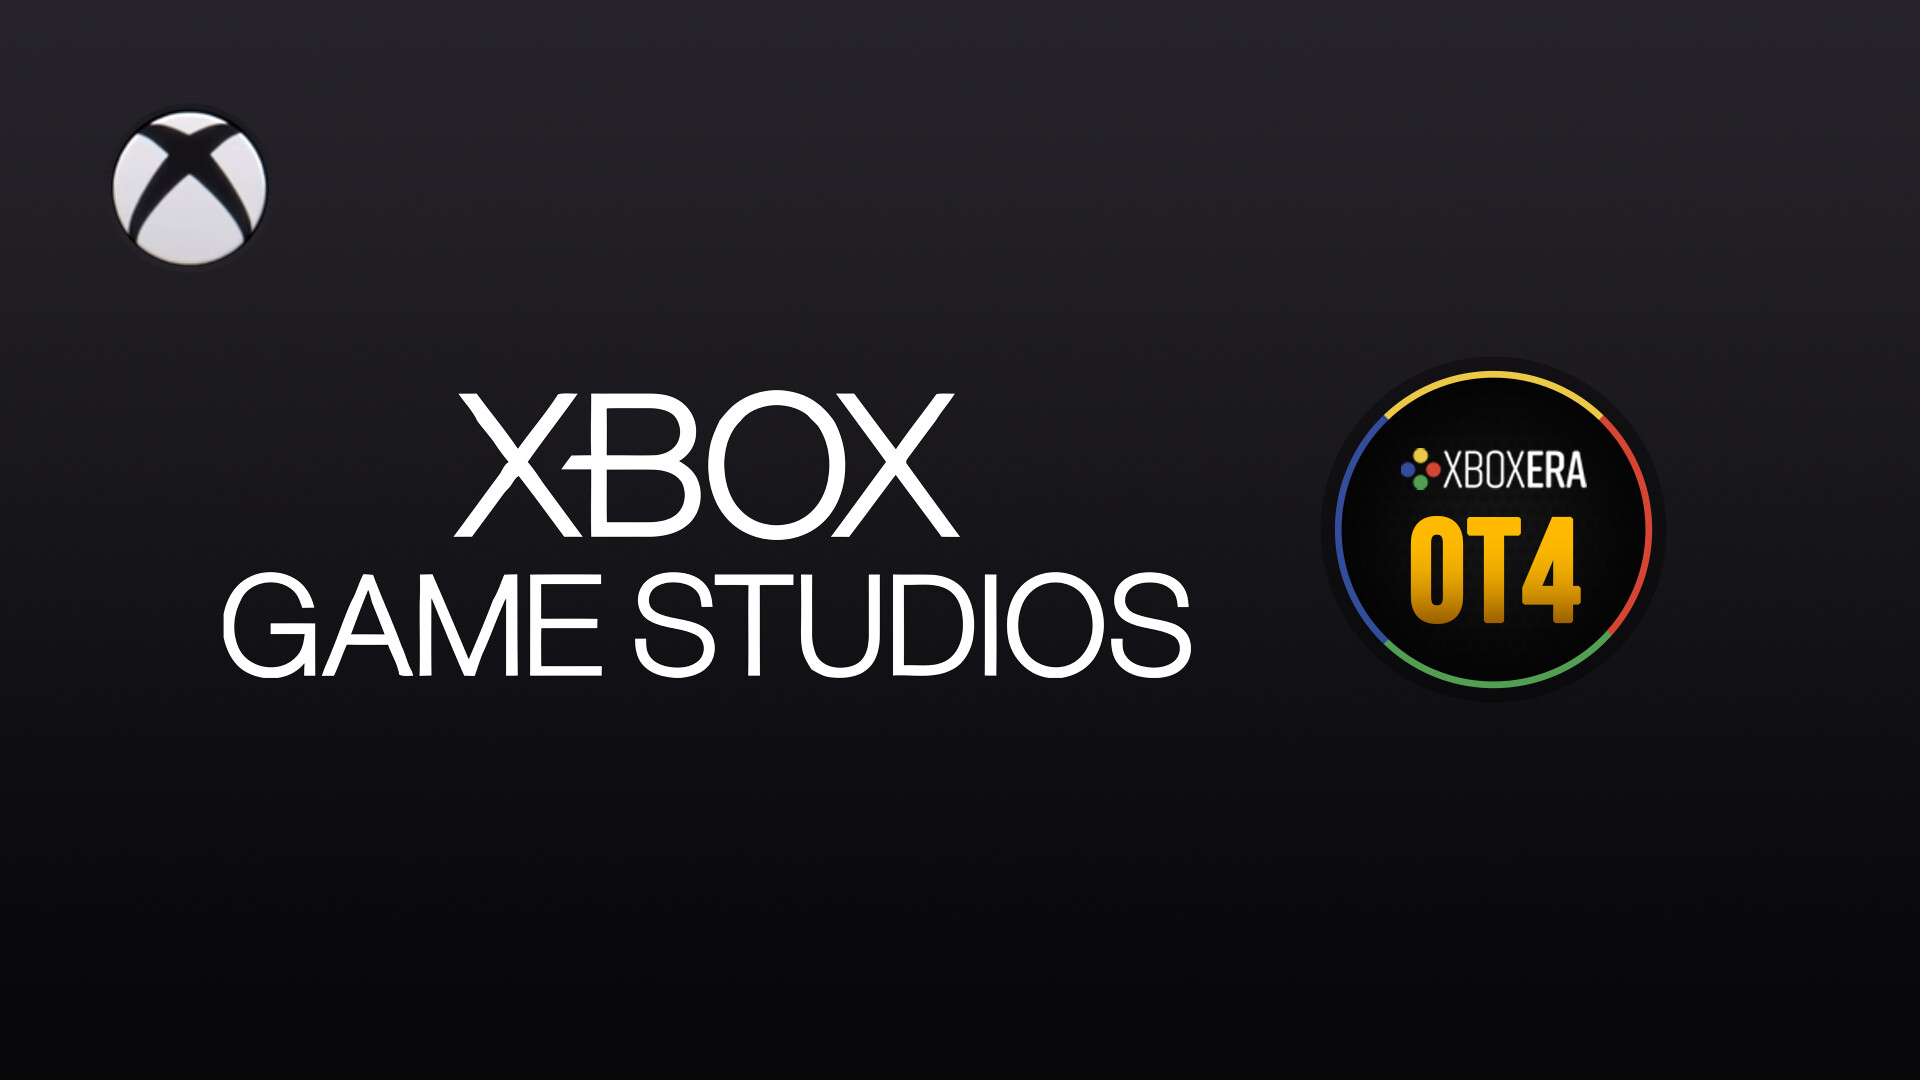 343 Industries on LinkedIn: Join Xbox Game Studios experts